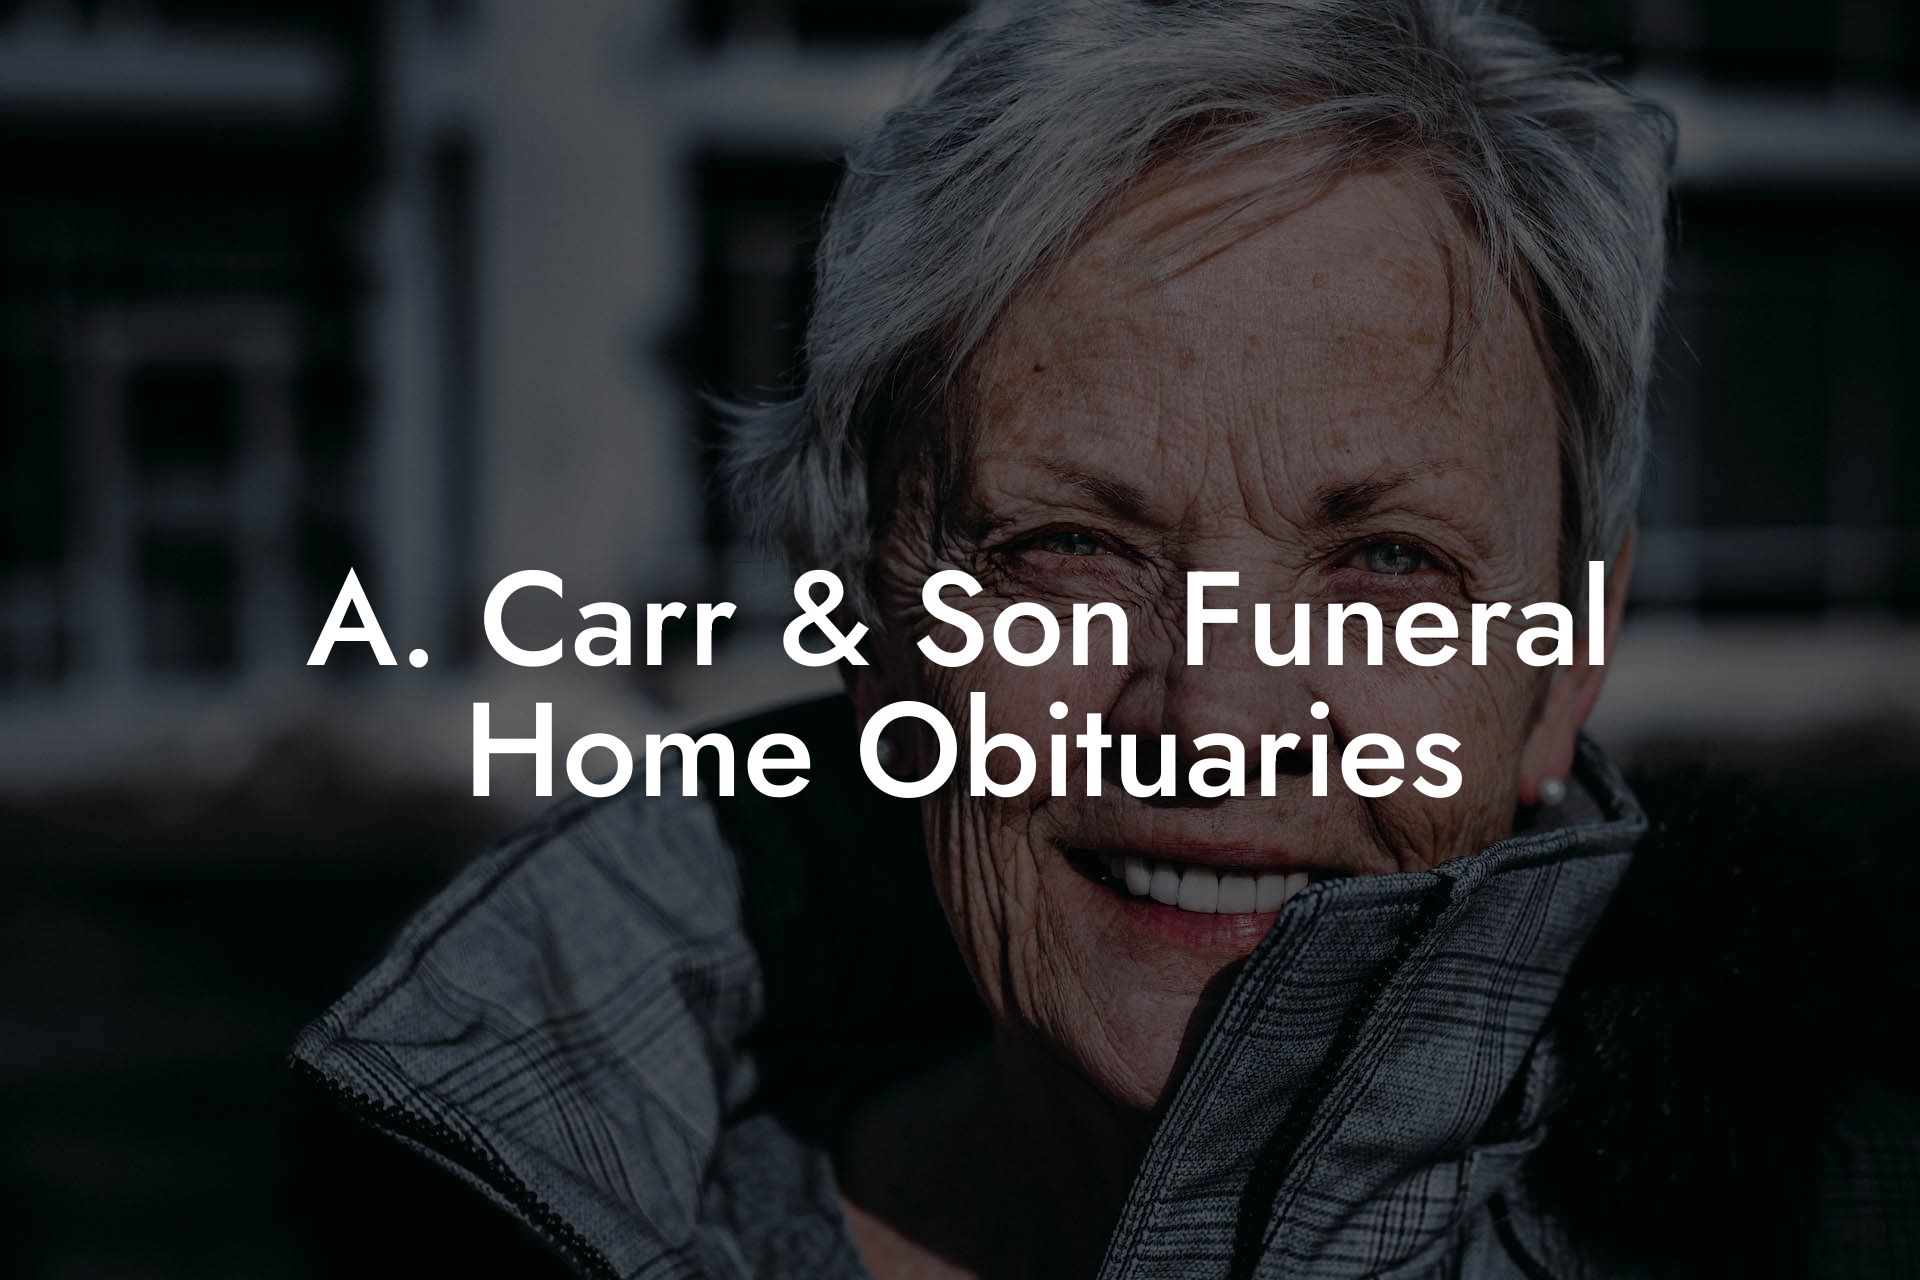 A. Carr & Son Funeral Home Obituaries